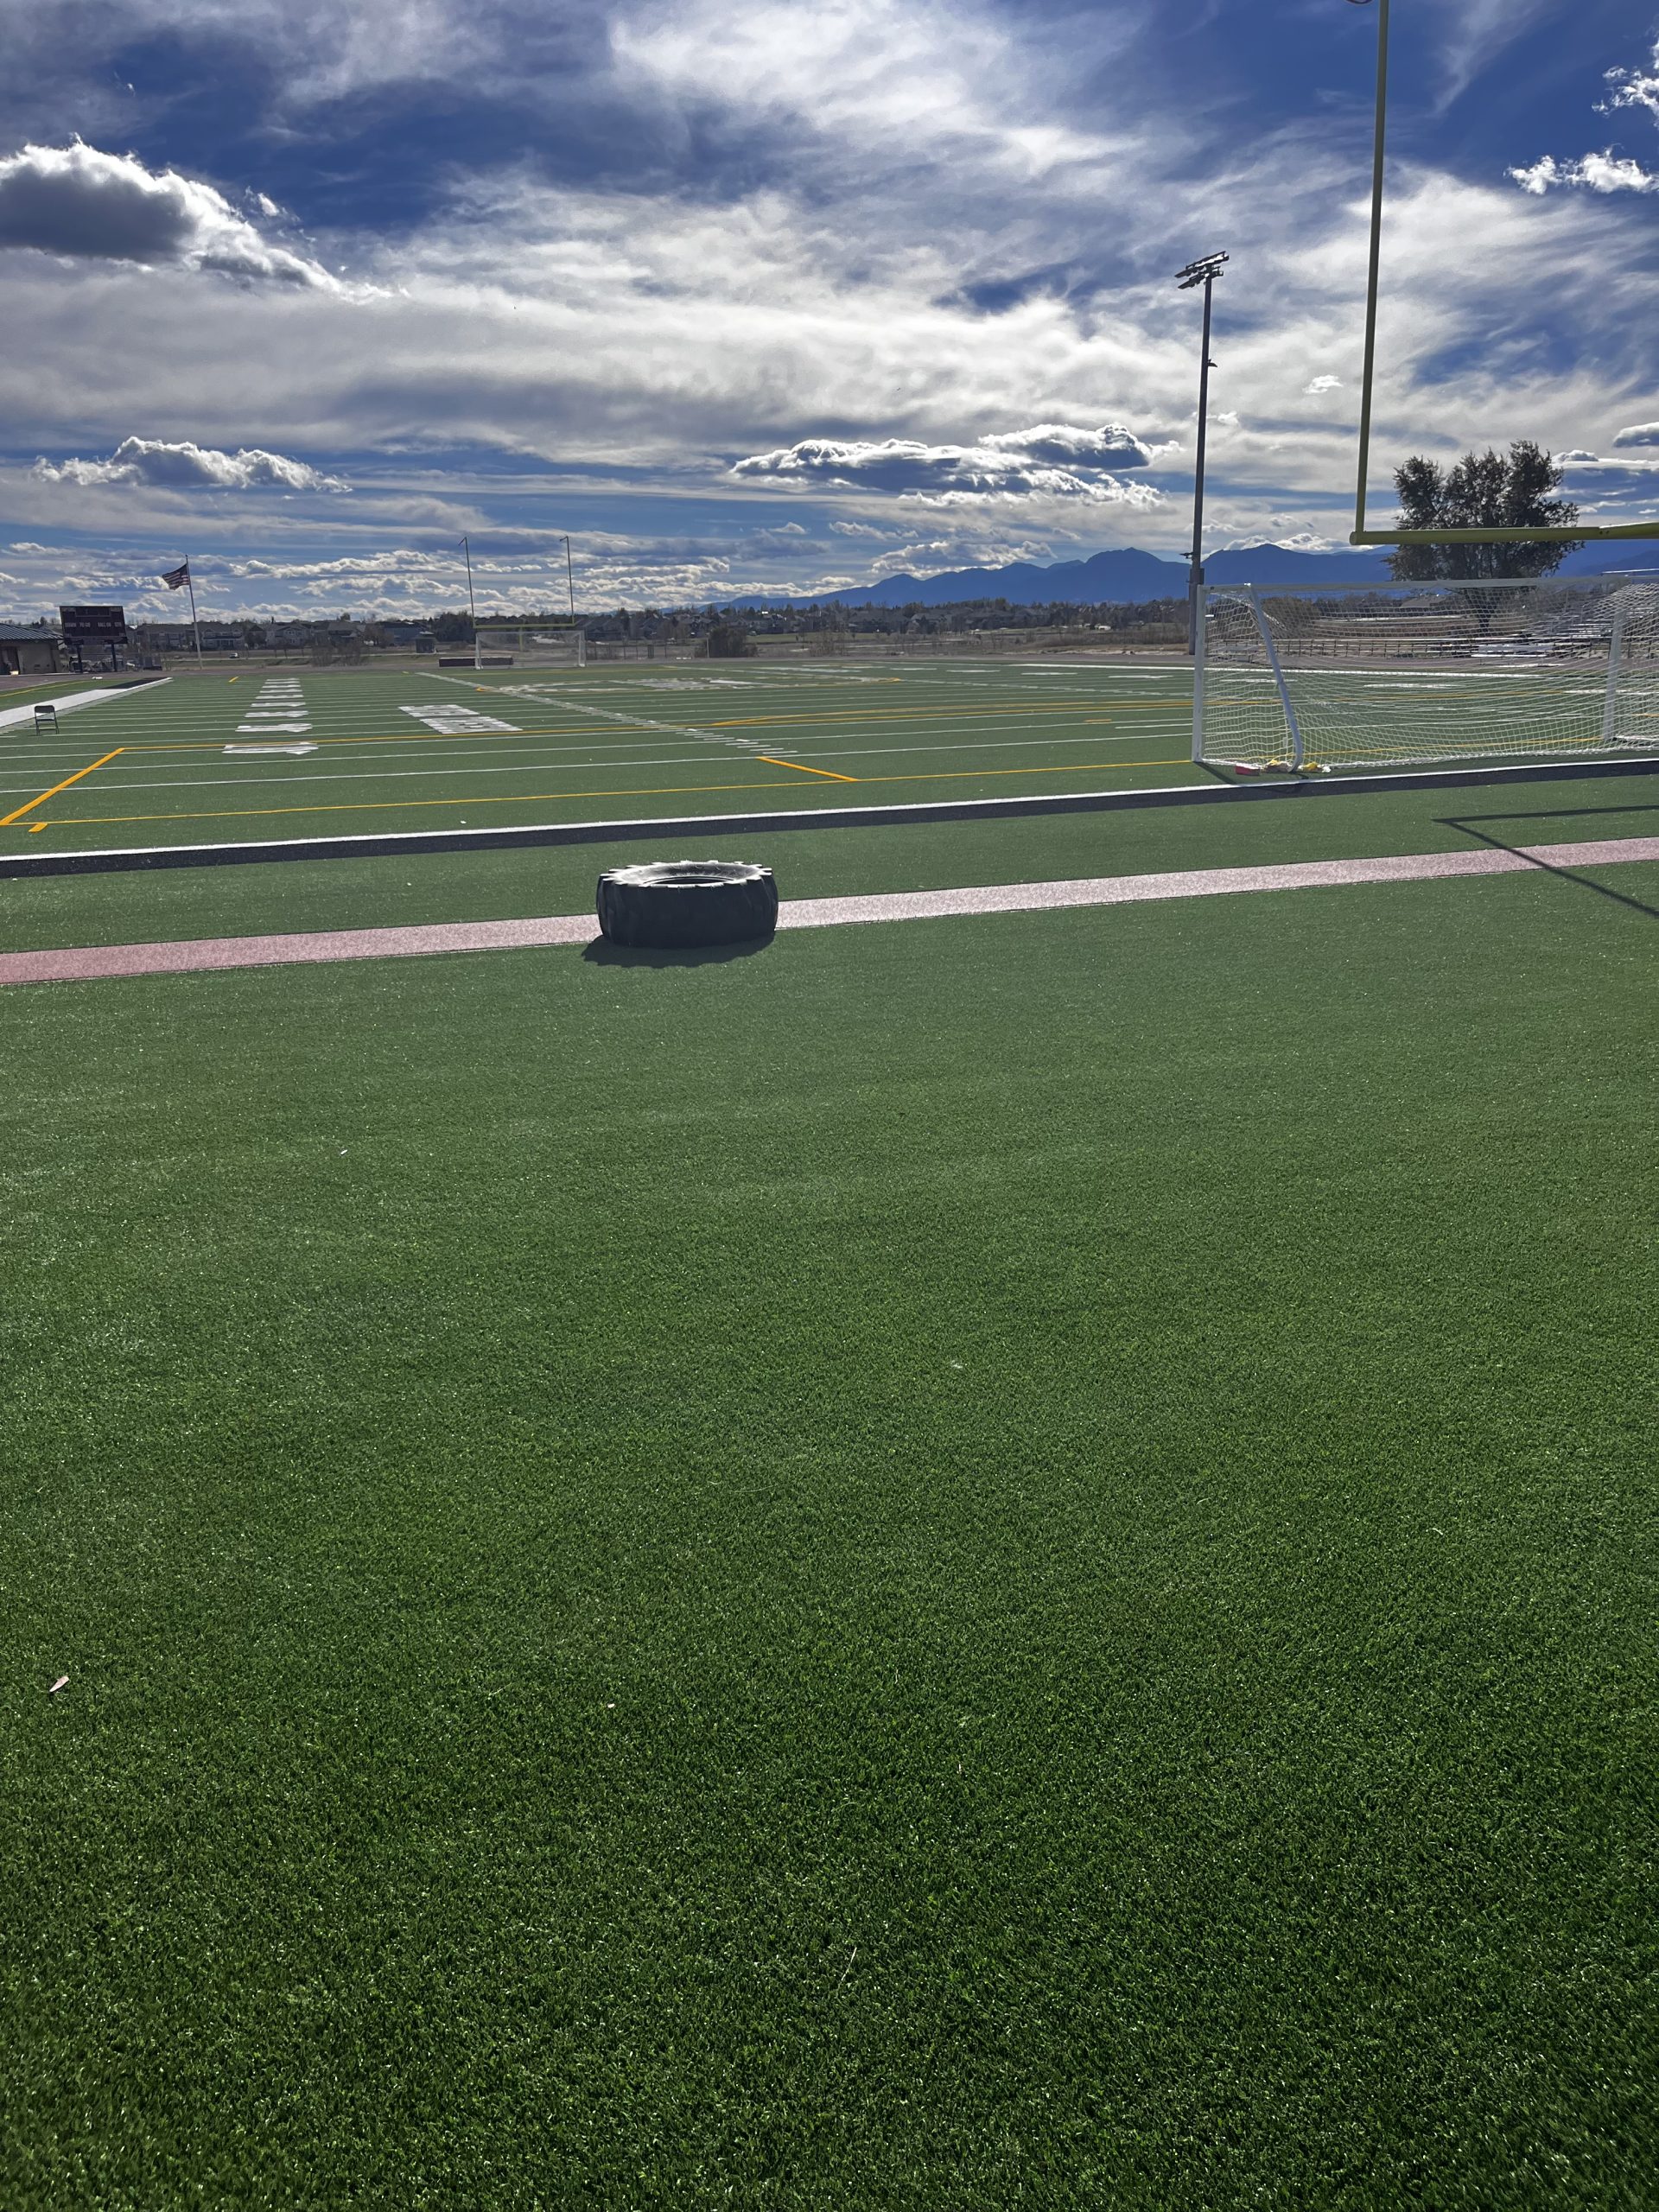 The new turf field at Silver Creek High School.